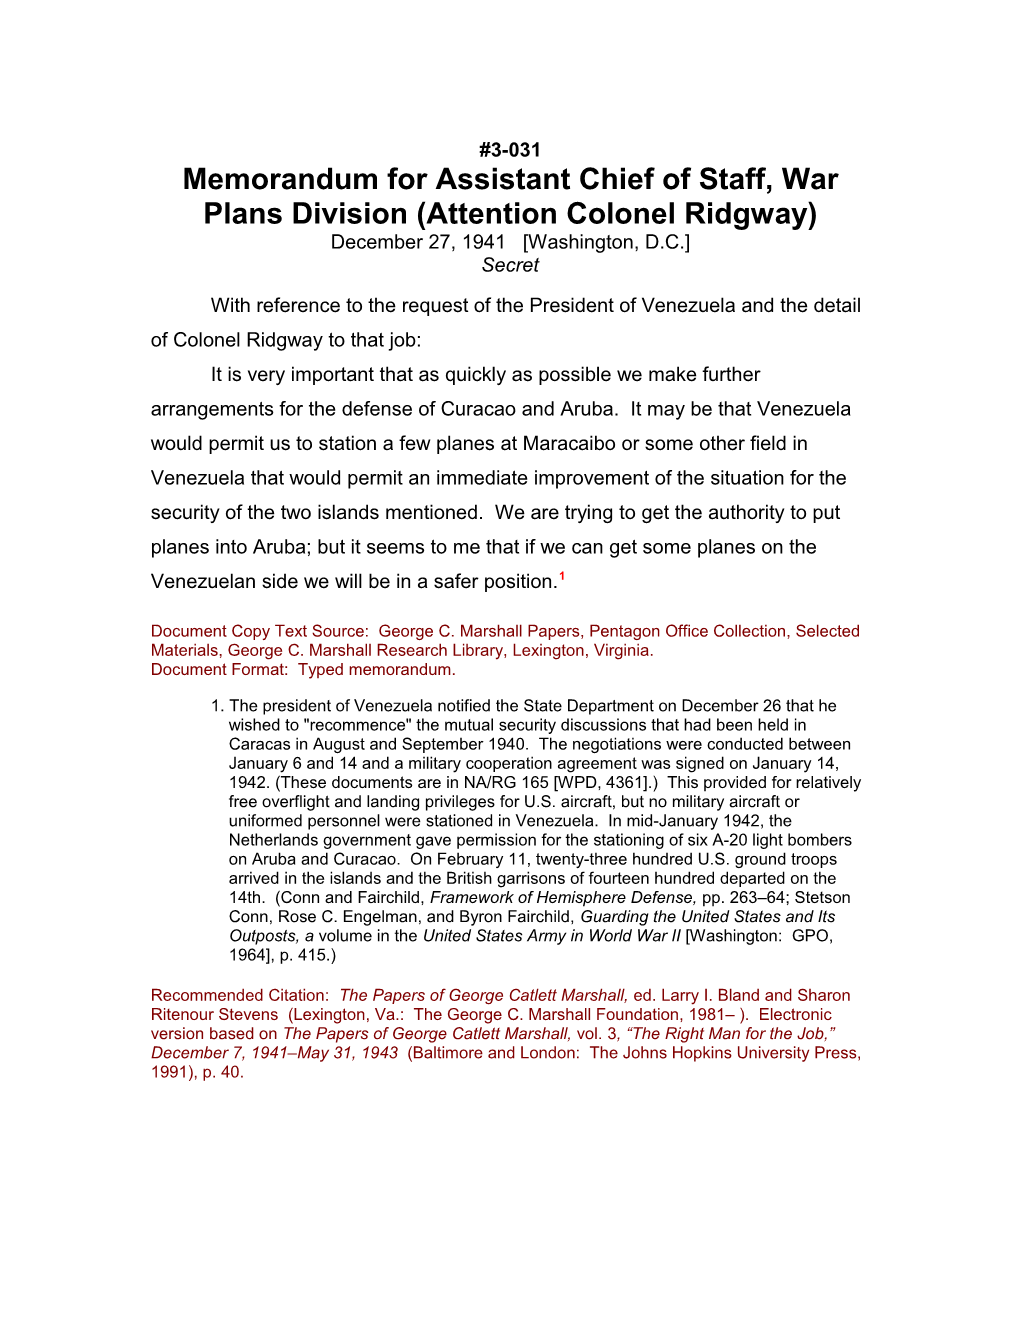 Memorandum for Assistant Chief of Staff, War Plans Division (Attention Colonel Ridgway)